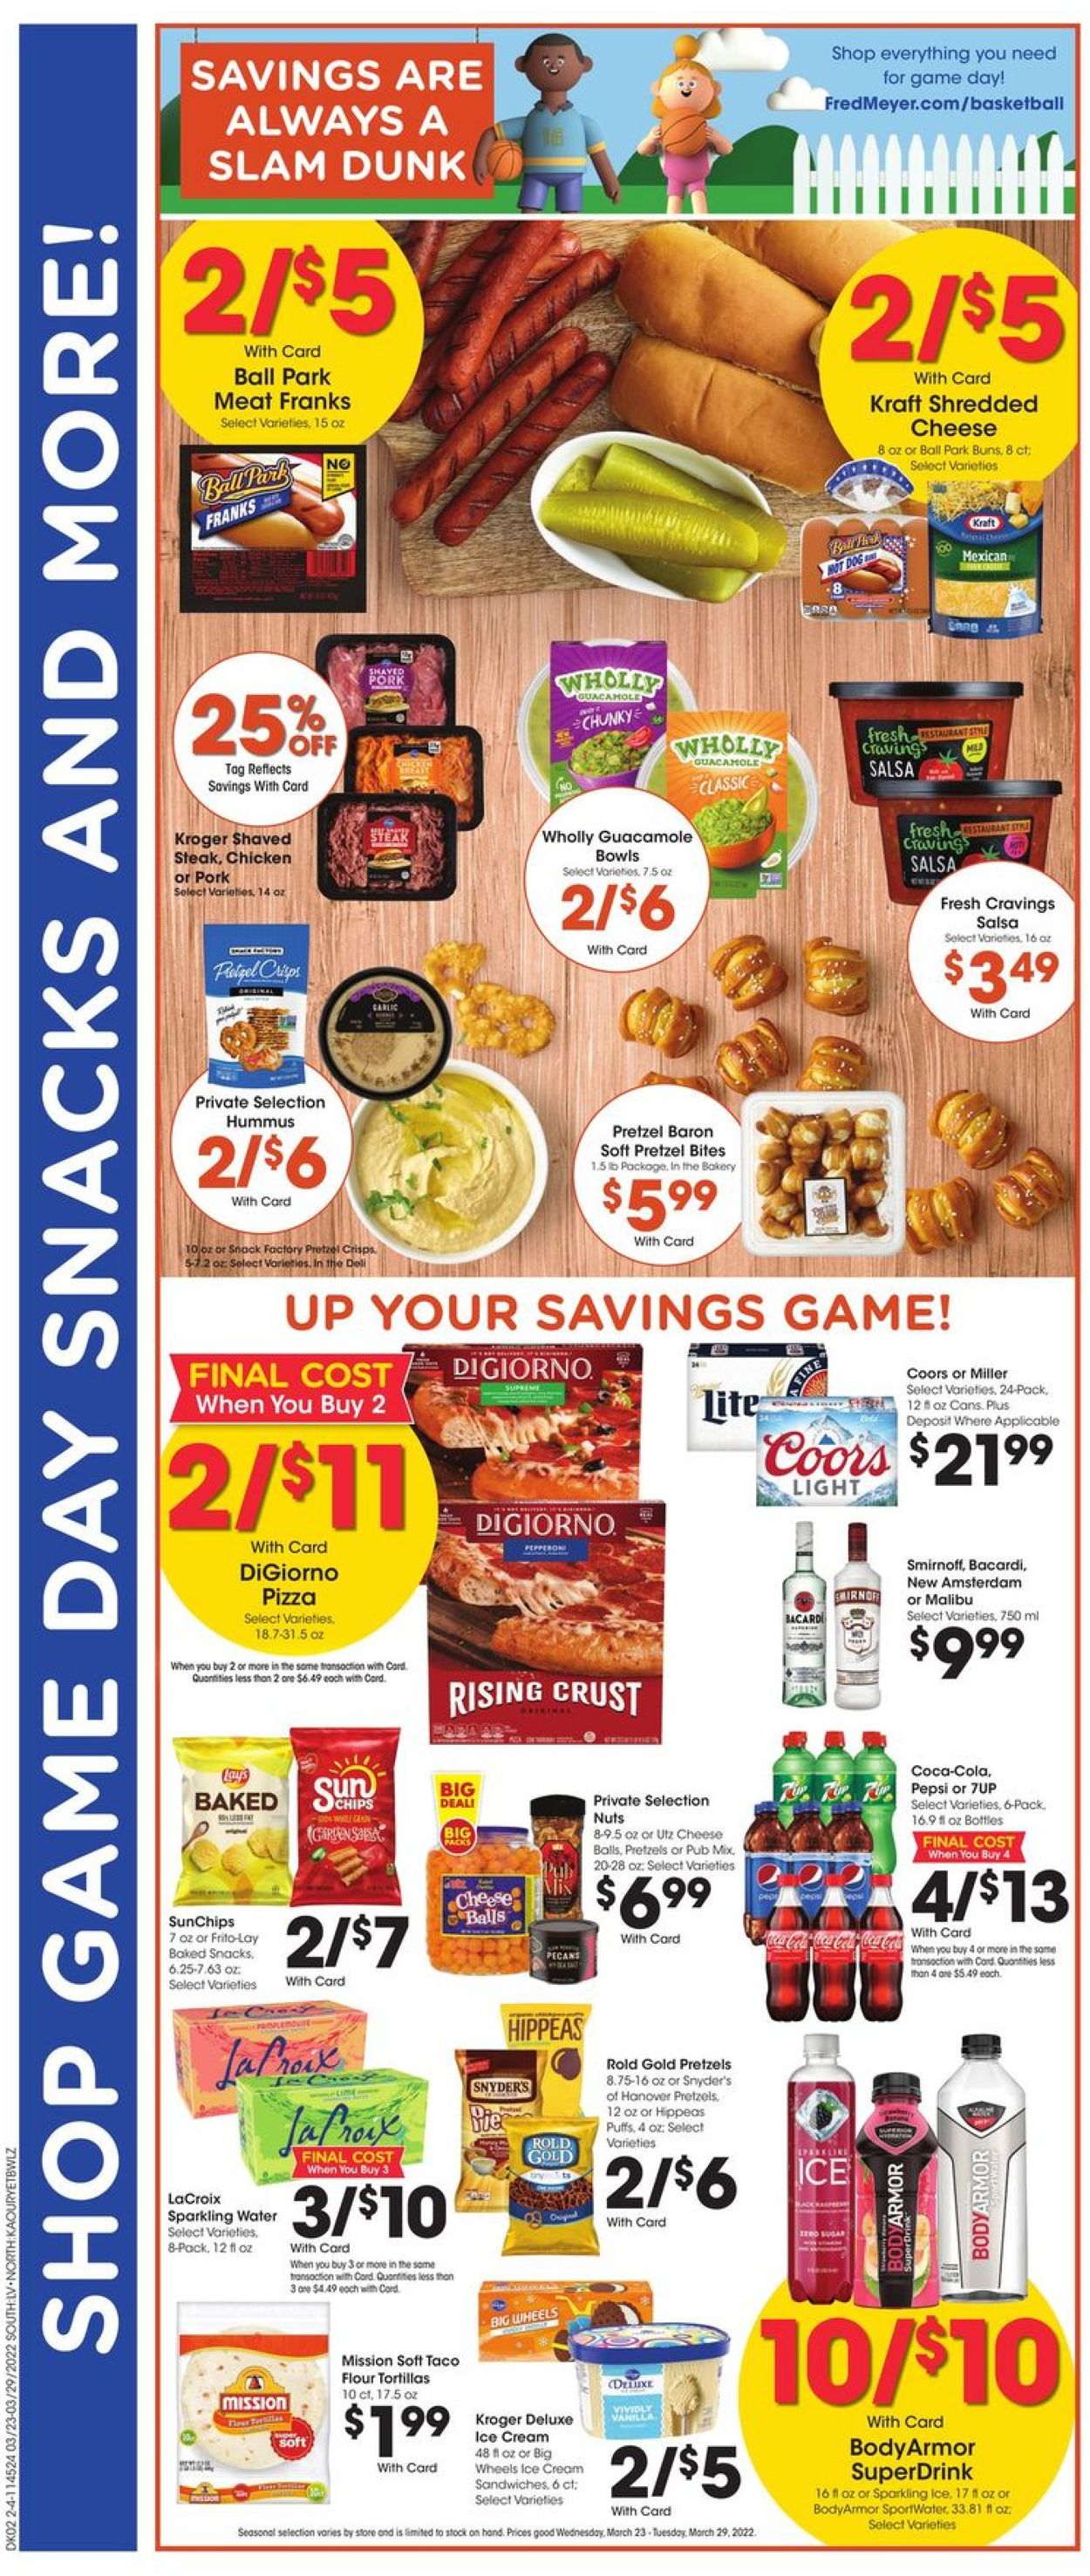 Fred Meyer Ad from 03/23/2022